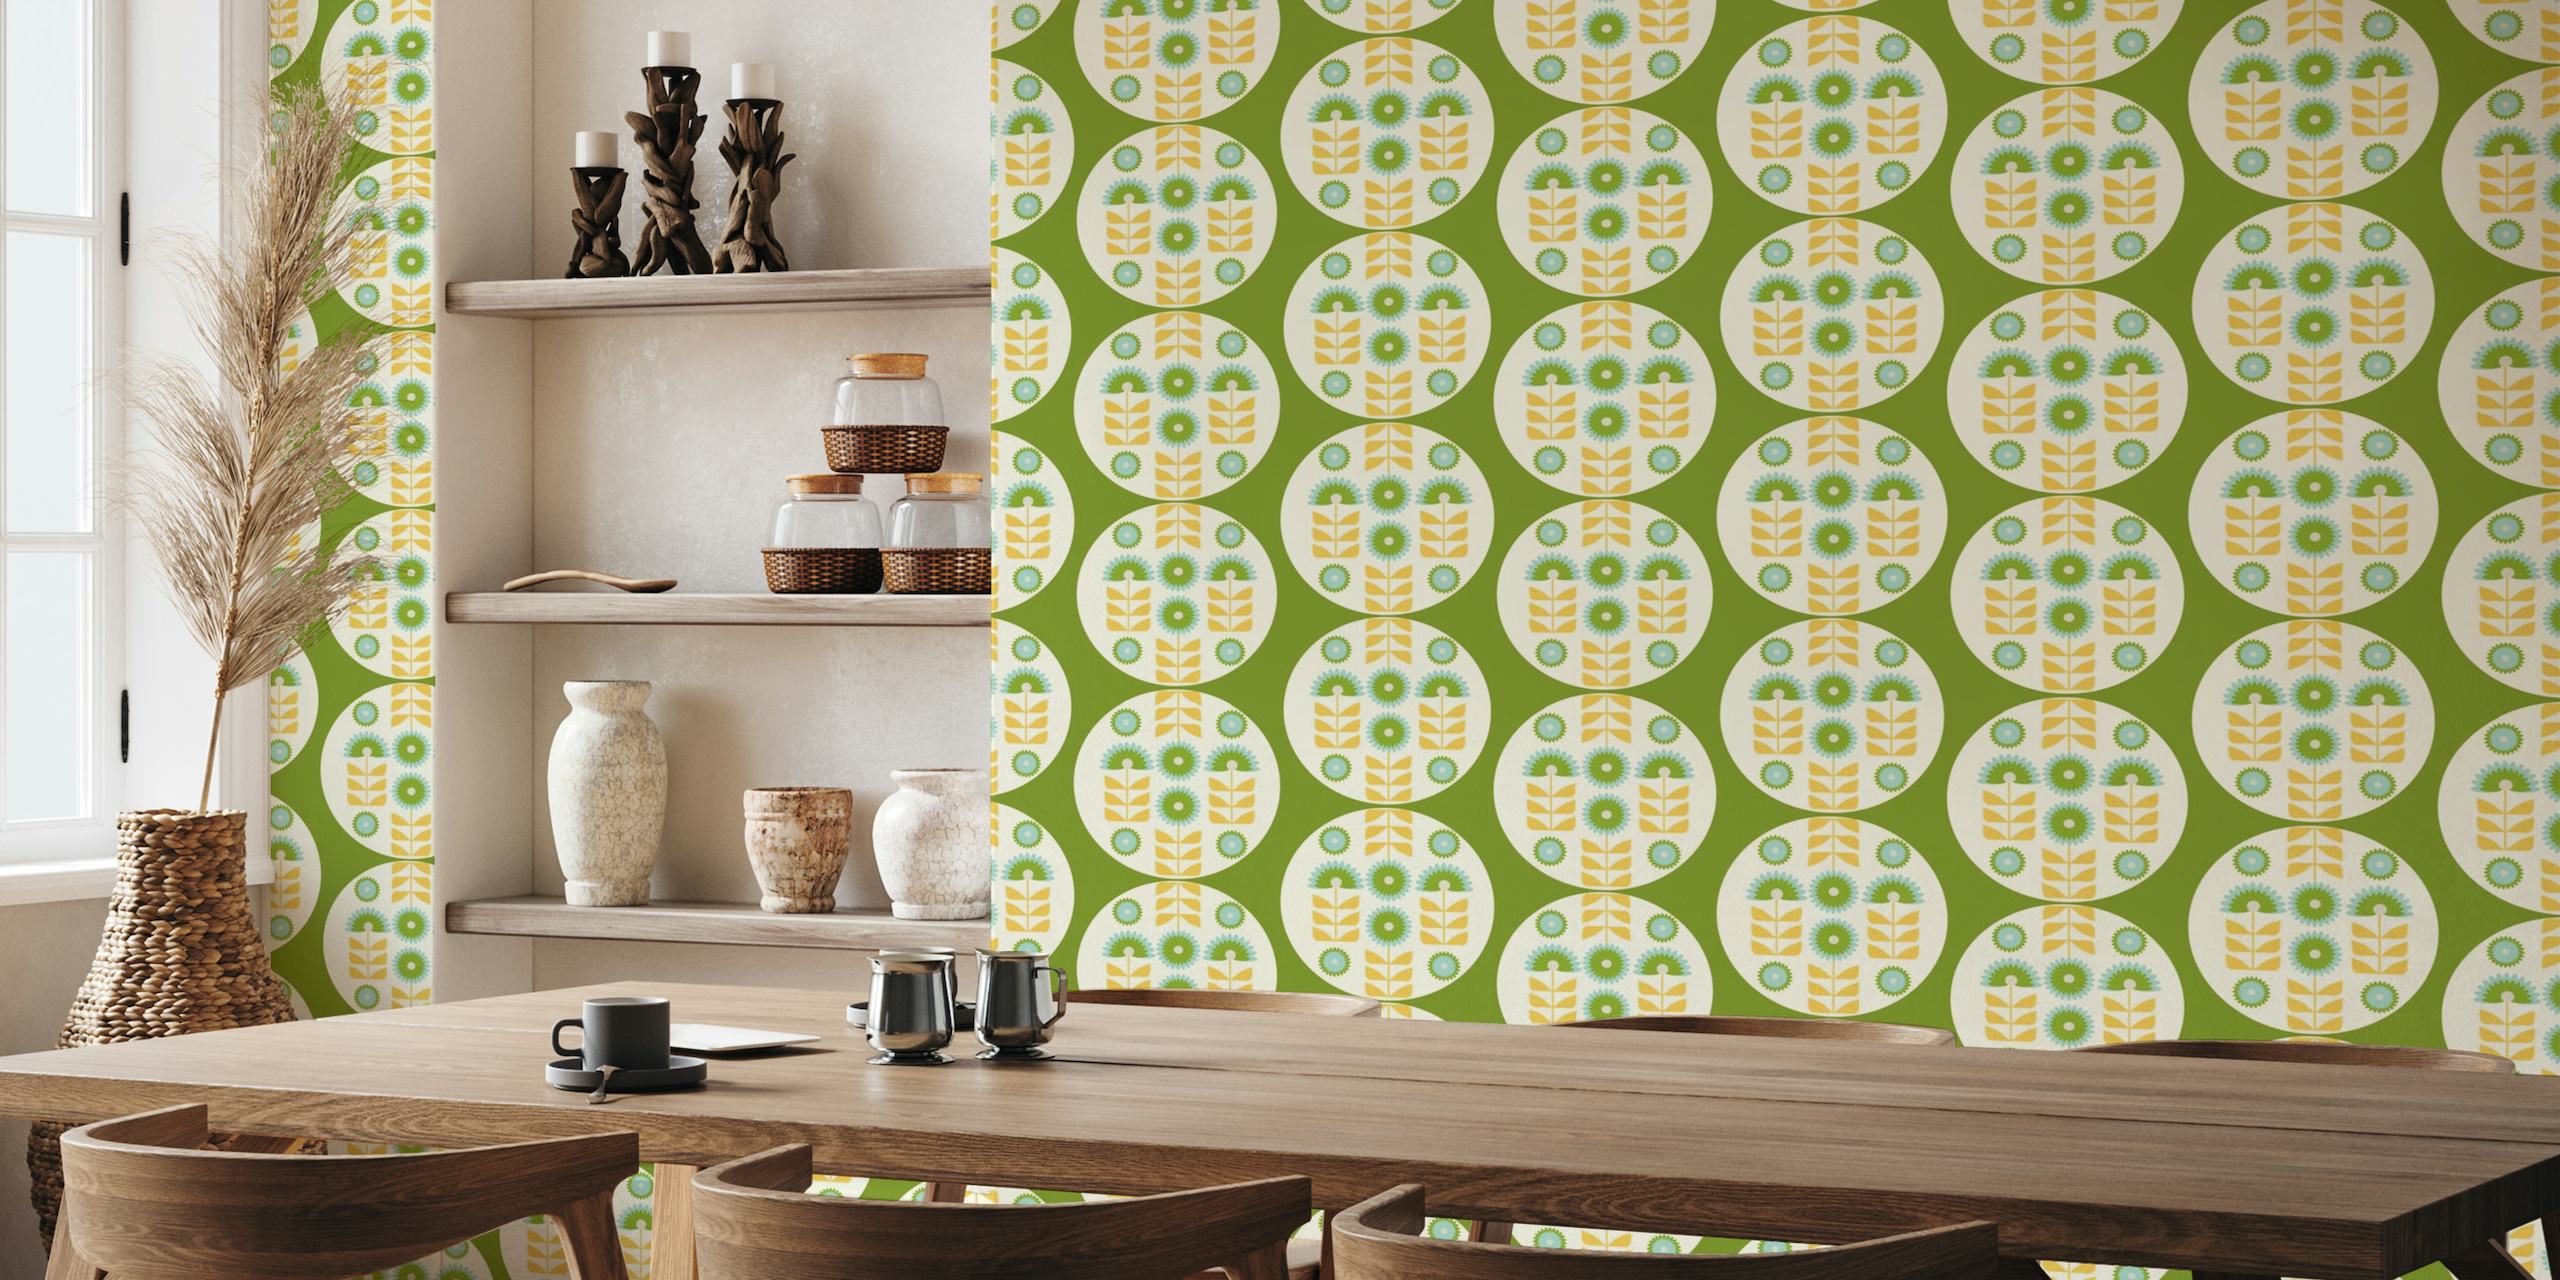 Retro 70s Funky florals in green tapetit